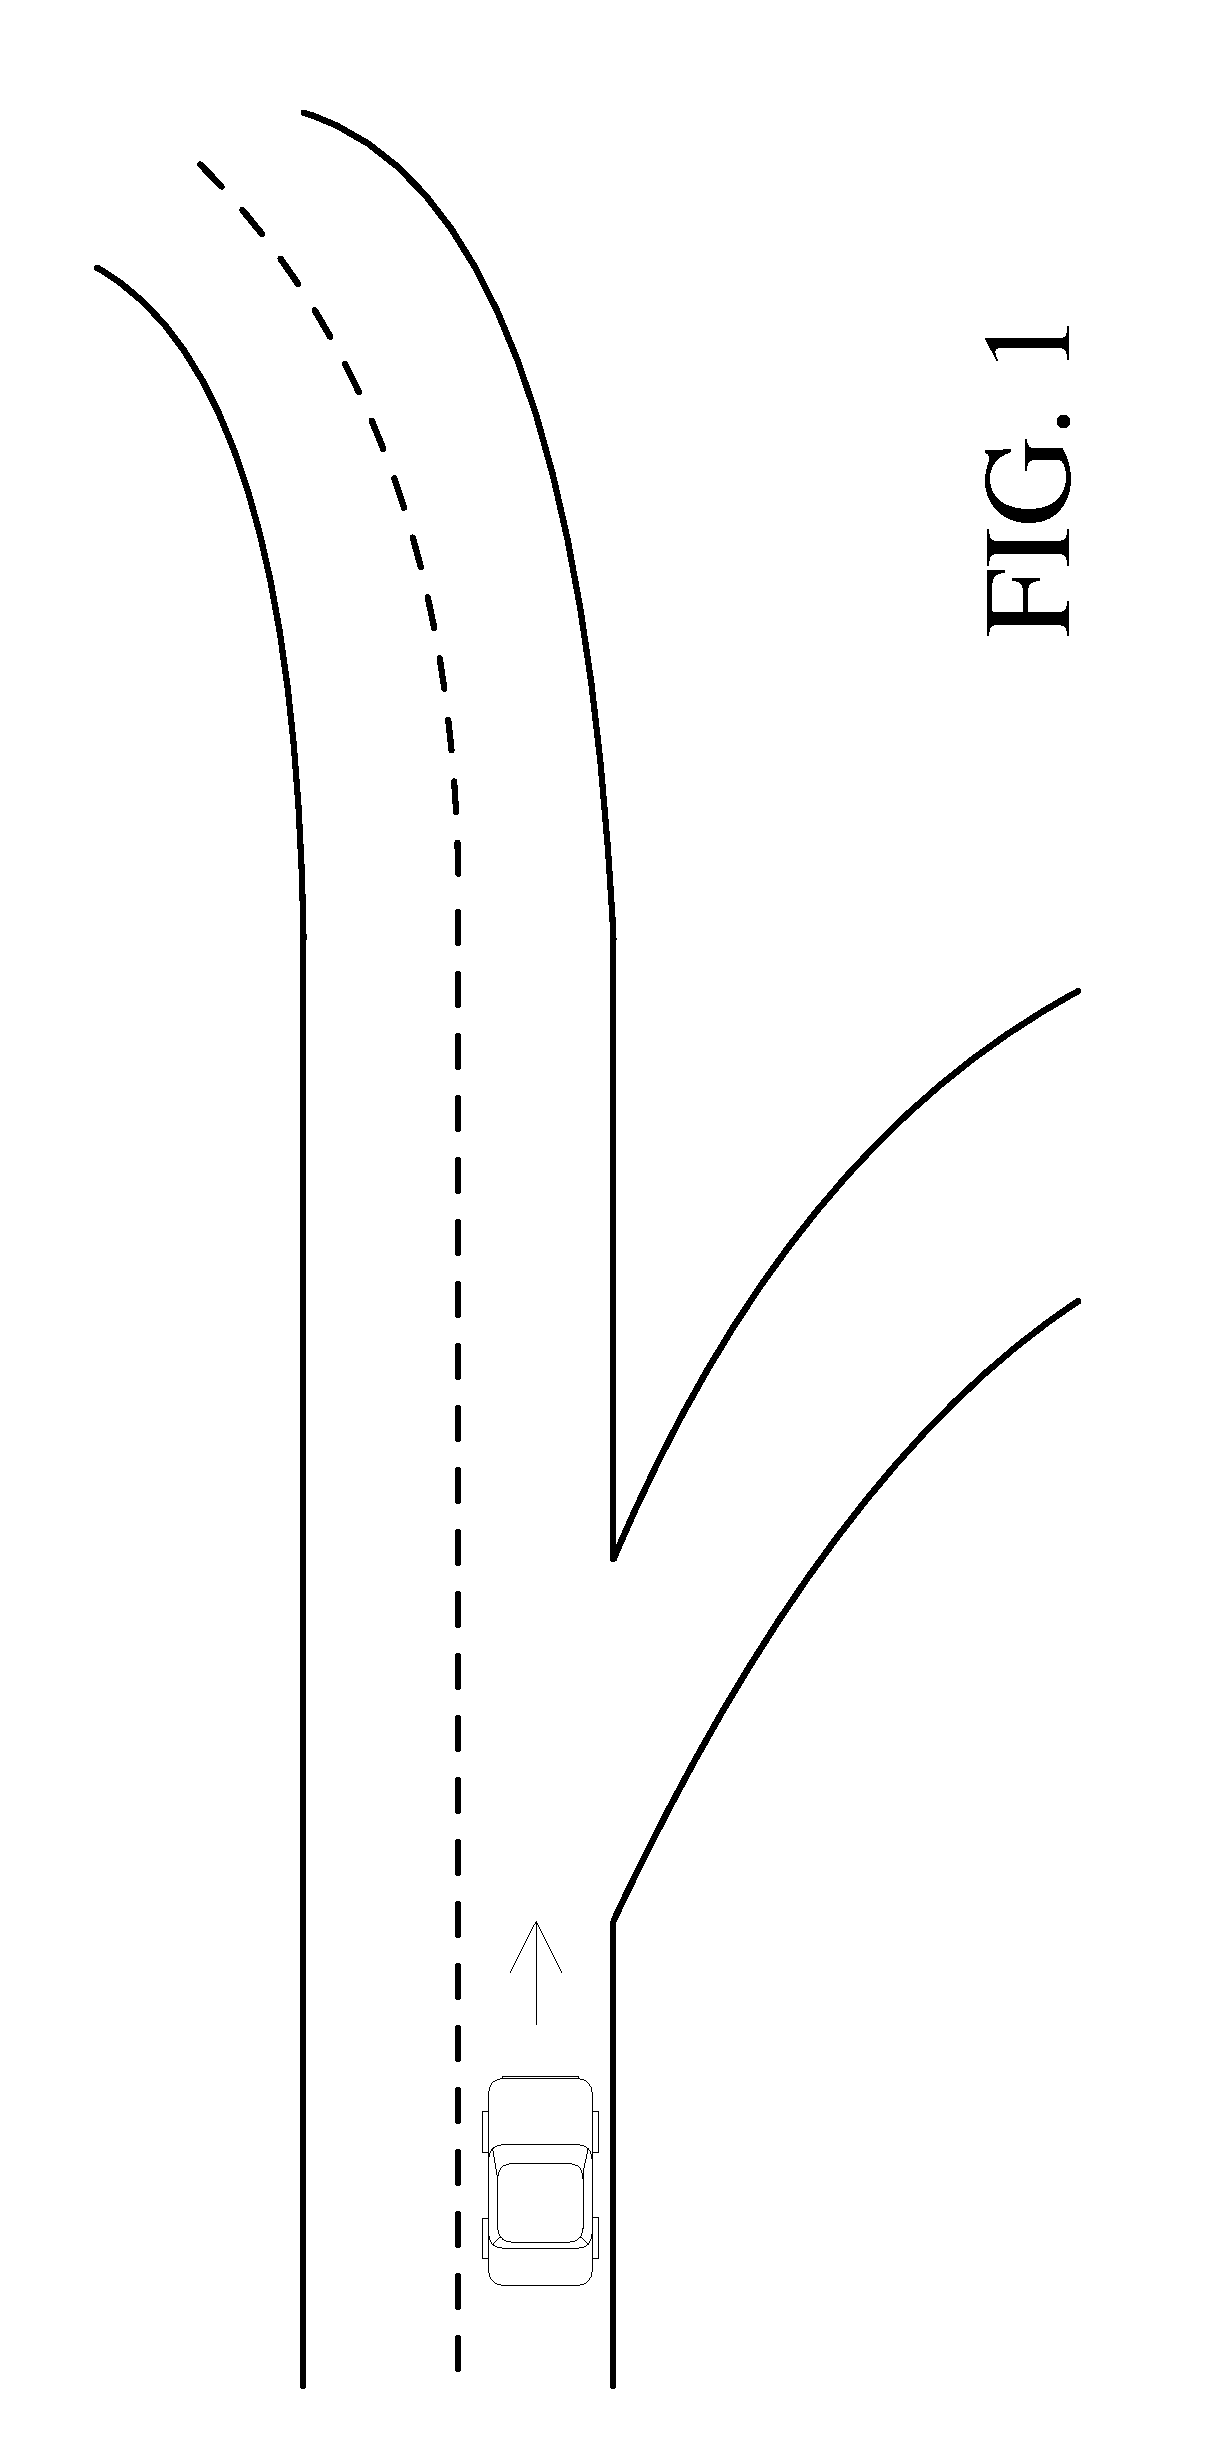 Curve-related accident mitigation